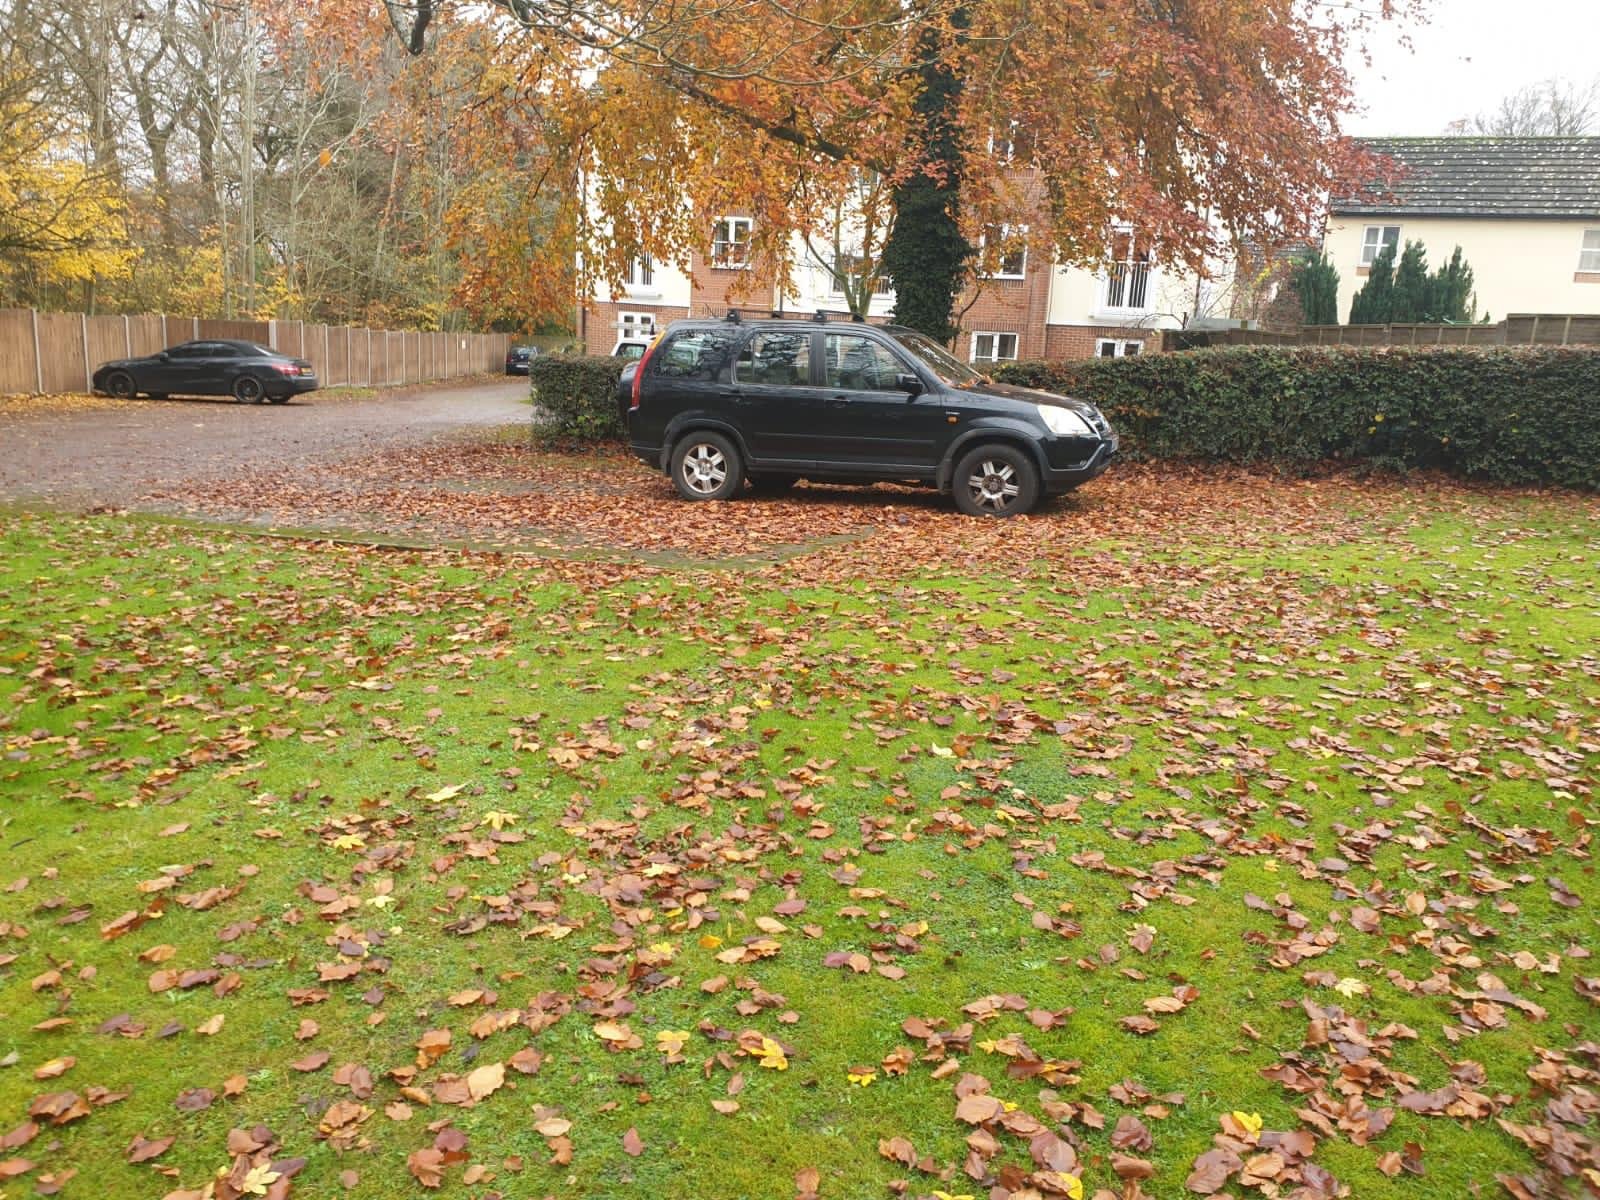 leaves covering lawns.jpeg